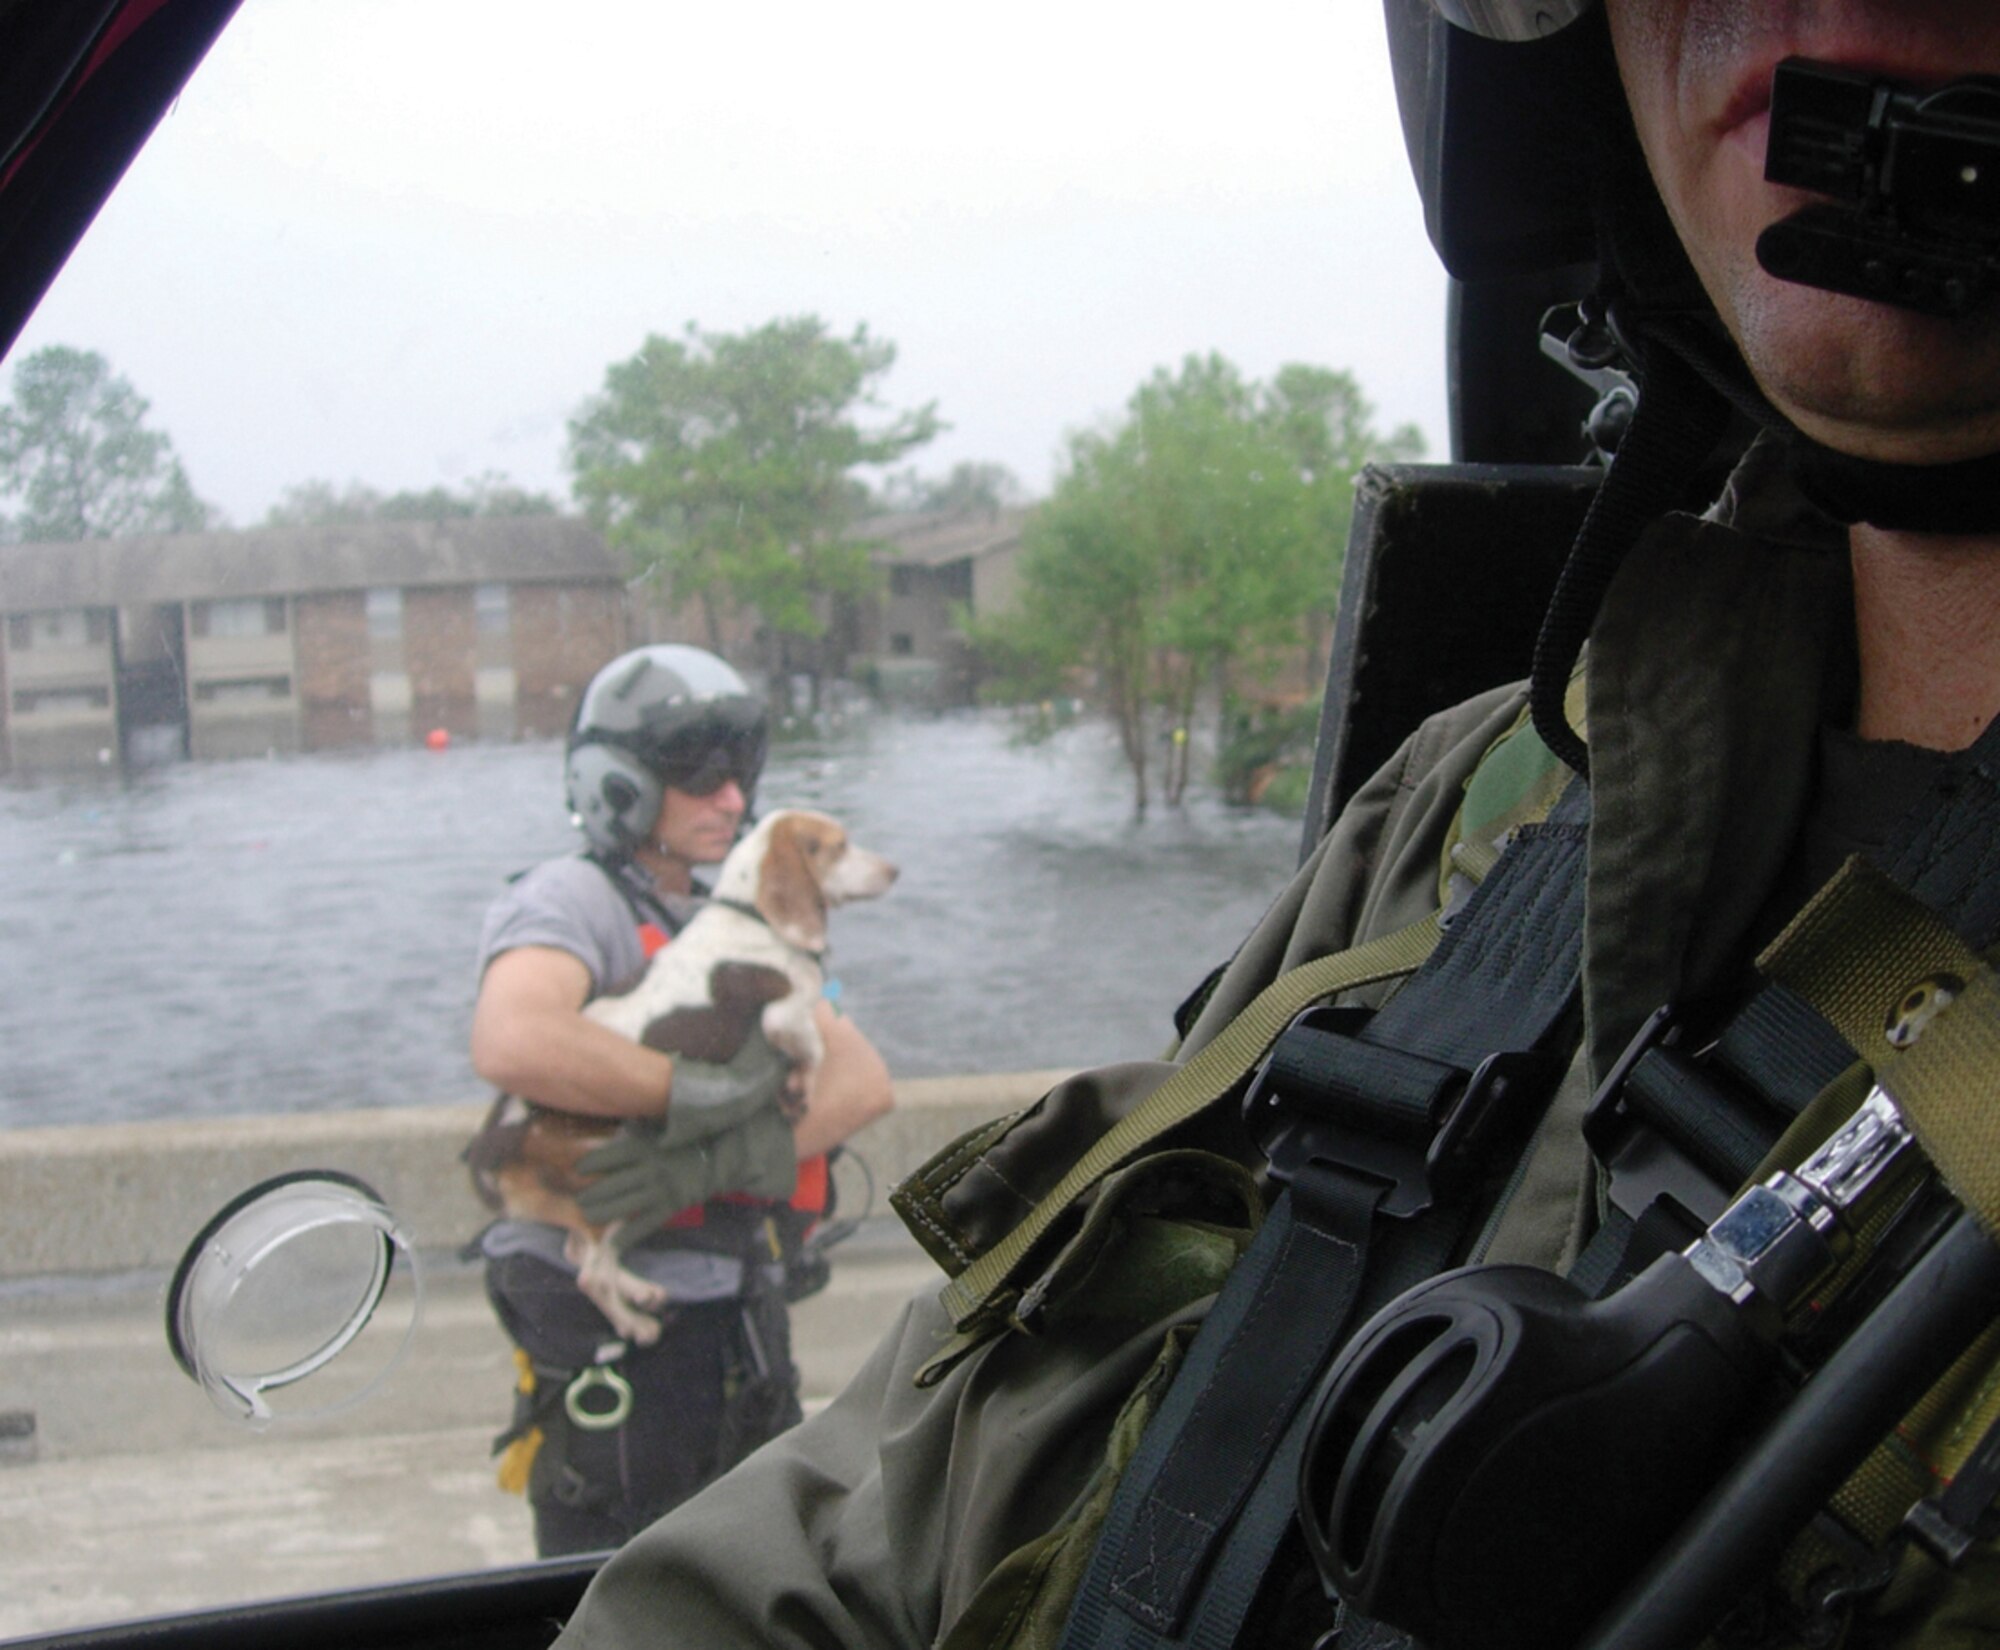 NEW ORLEANS, La.- Surrounded by flood waters, Senior Master Sgt. Pete Callina rescues the stranded beagle from the I-10 overpass. The dog assisted Sergeant Callina, a pararescueman with the 308th Rescue Squadron, by shepparding hurricane victims into waiting 920th Rescue Wing helicopters. (U.S. Air Force photo)